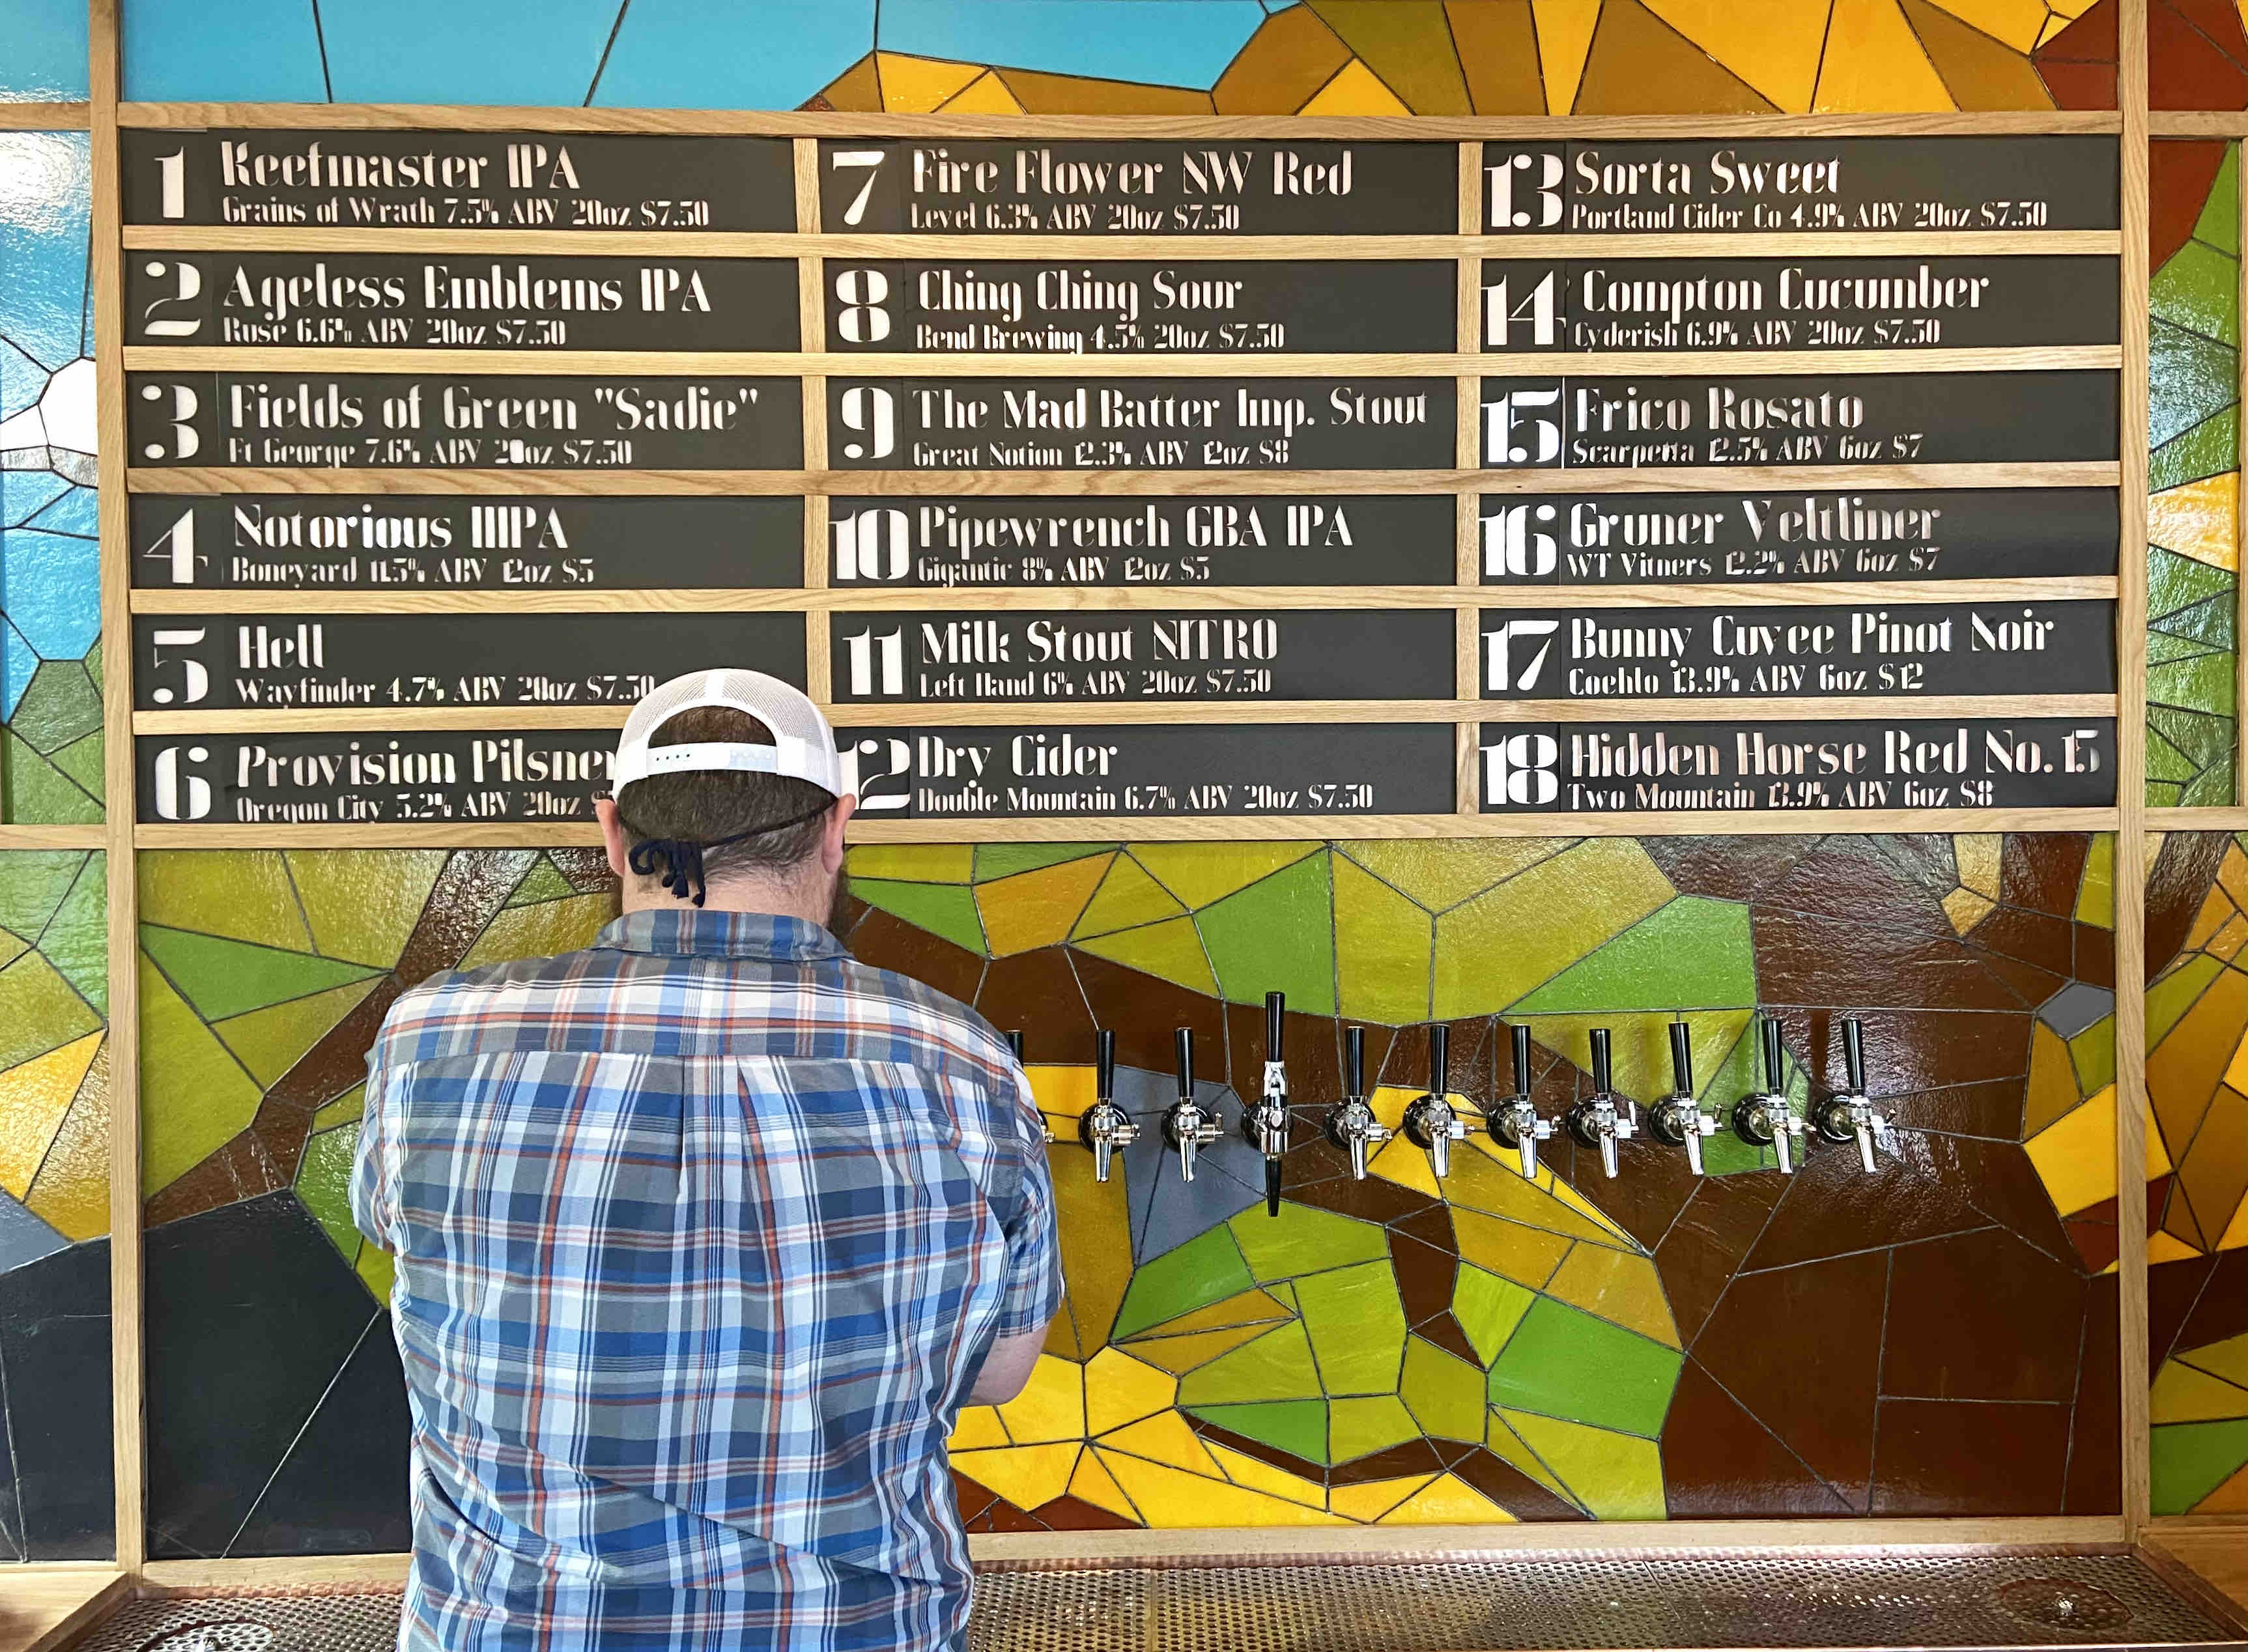 The taplist with a stained glass mosaic print adorns the backdrop of the bar at Proper Pint Oakroom.